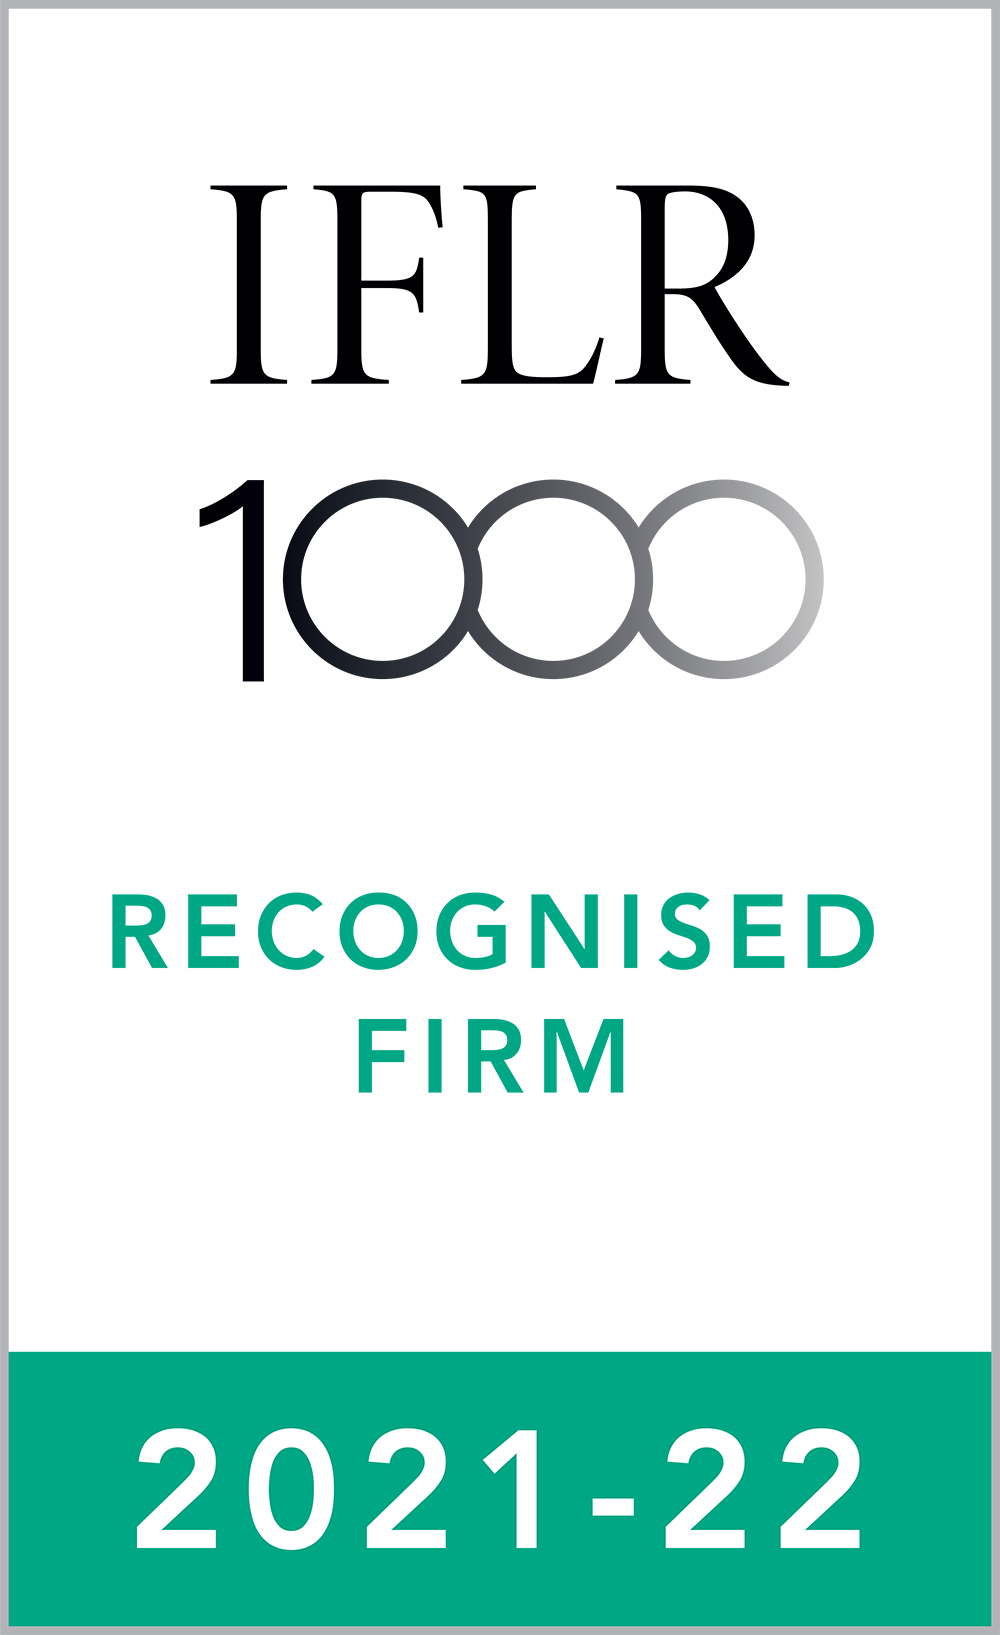 Ranked "Notable" Firm by IFLR1000, 2021/22 edition